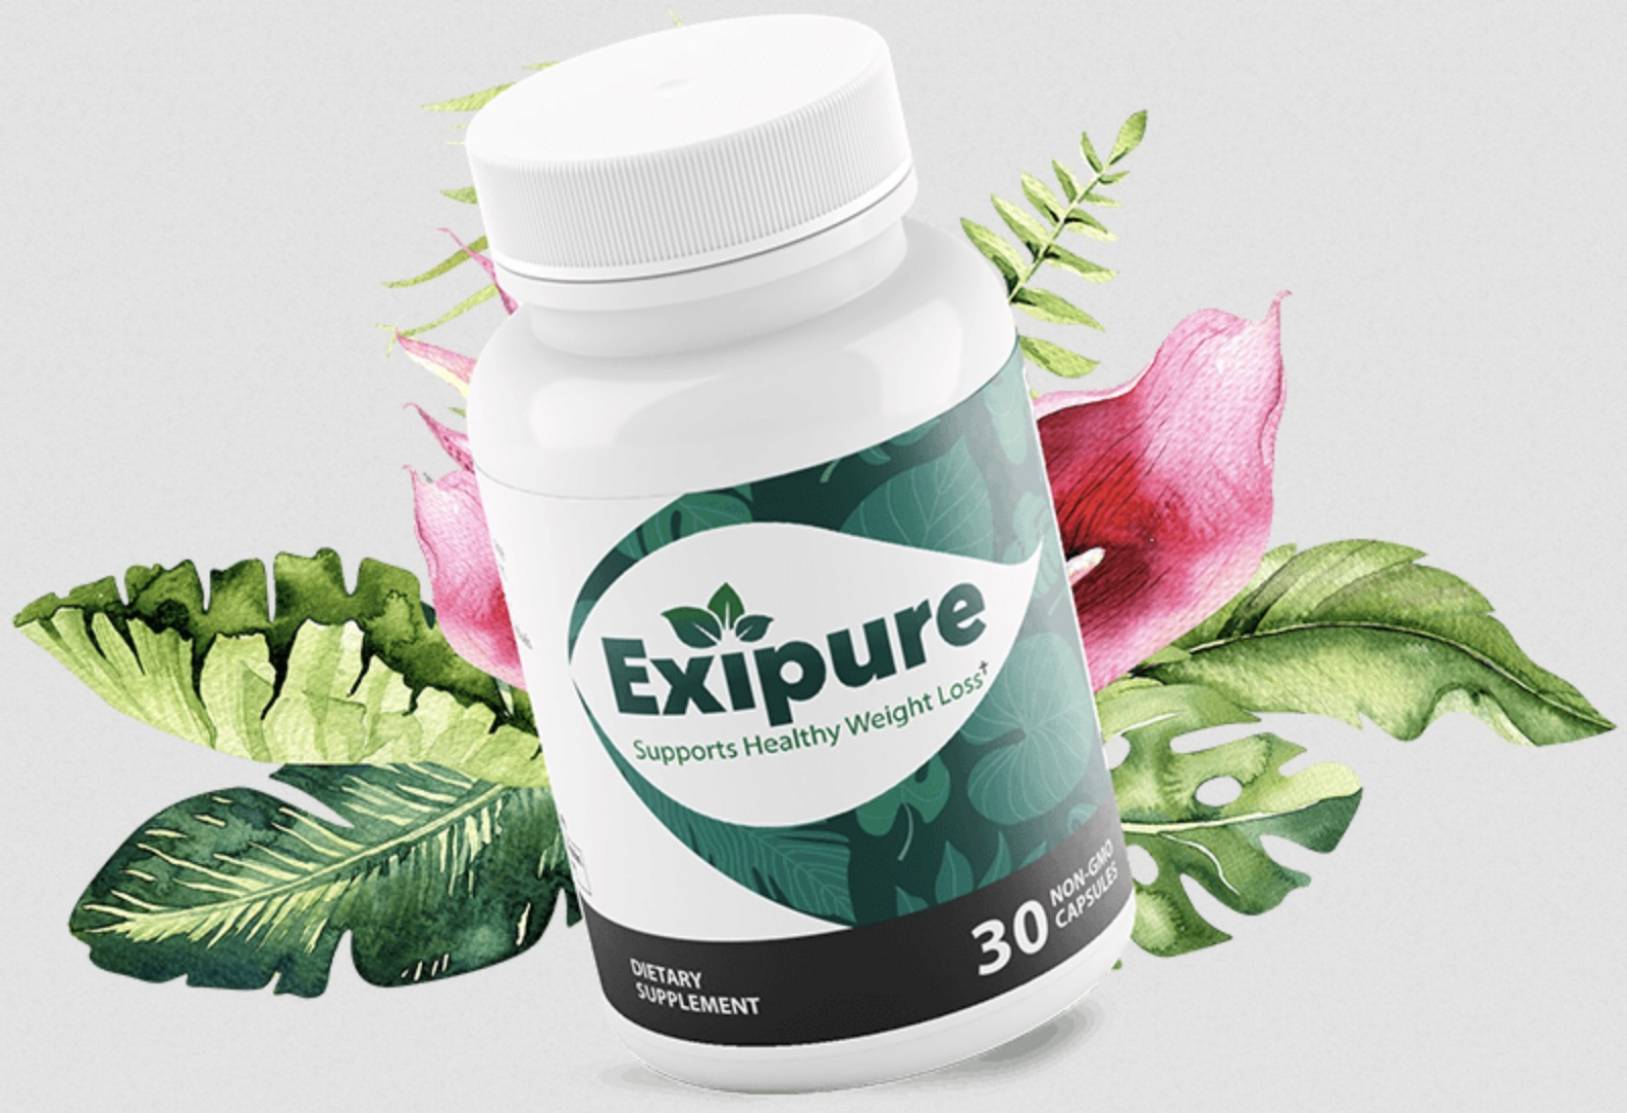 Is Exipure Approved By The Fda